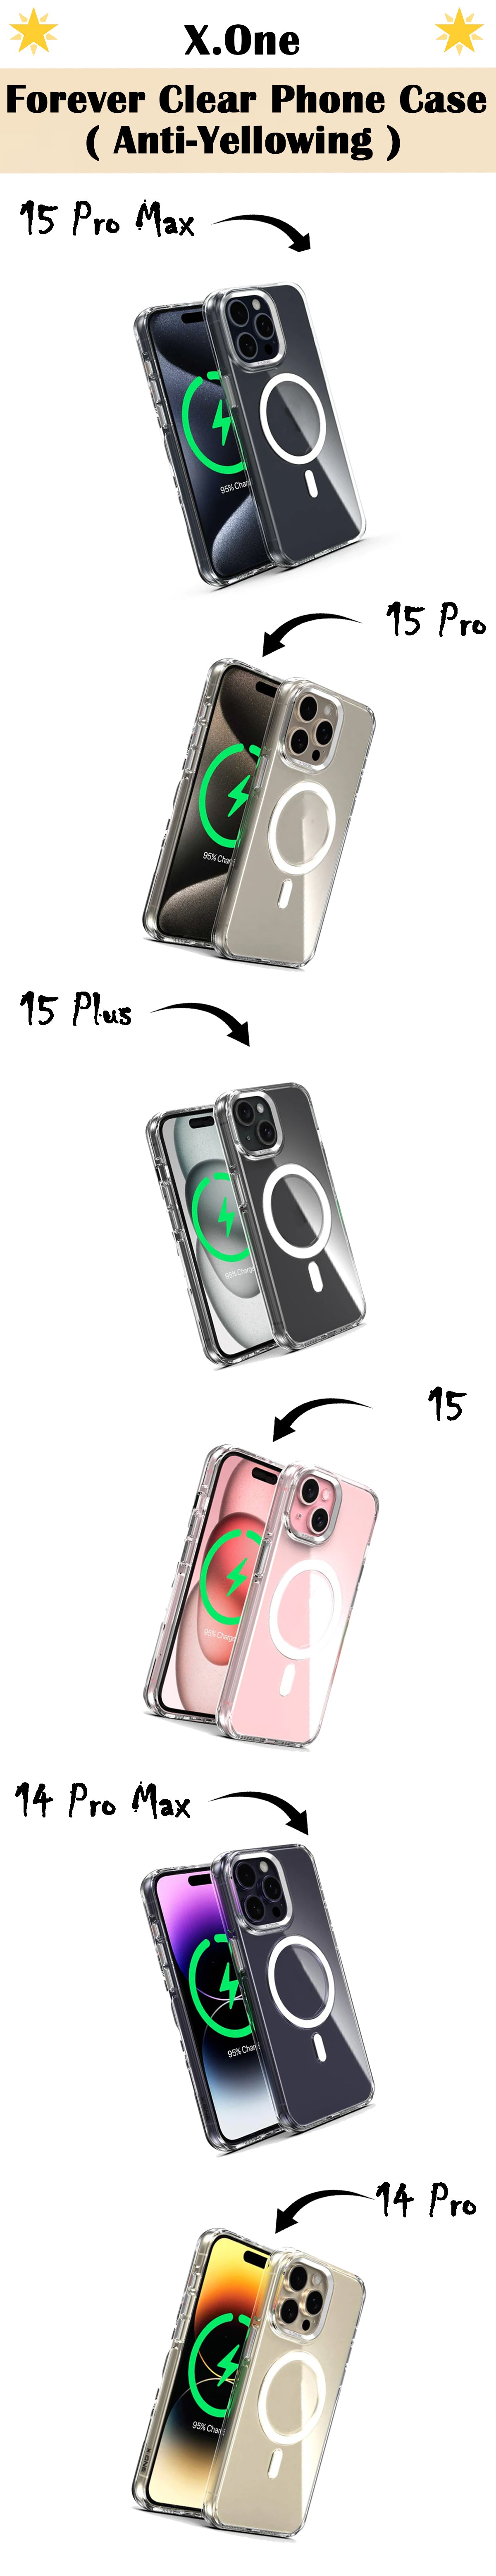 X.One Forever Clear ( Anti-Yellowing ) Phone Case for iPhone 15 and 14 Series - Magsafe Compatible